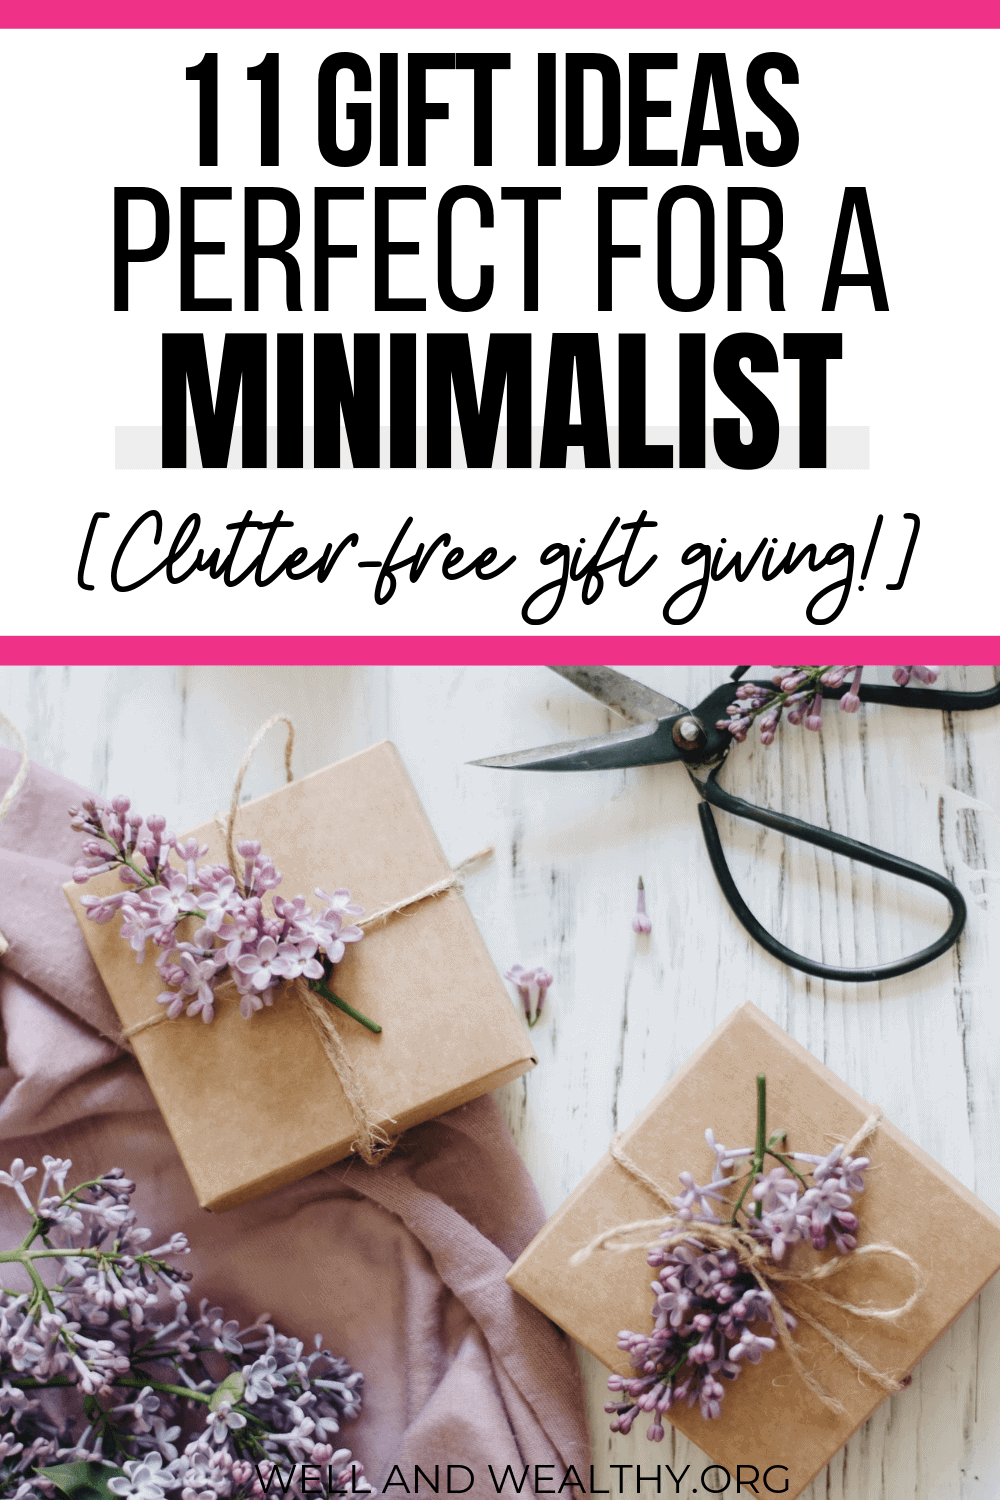 Looking for a gift guide to help you find the perfect gift for the minimalist in your life? Then you're in the right place! This post is full of 11 simple minimalist gift ideas for easy, clutter-free gift giving! Find something for everyone on your list, including gifts for kids, for her, for him, for moms, and for dads. Whatever you need we've got it! #minimalist #minimalism #gift #giftideas